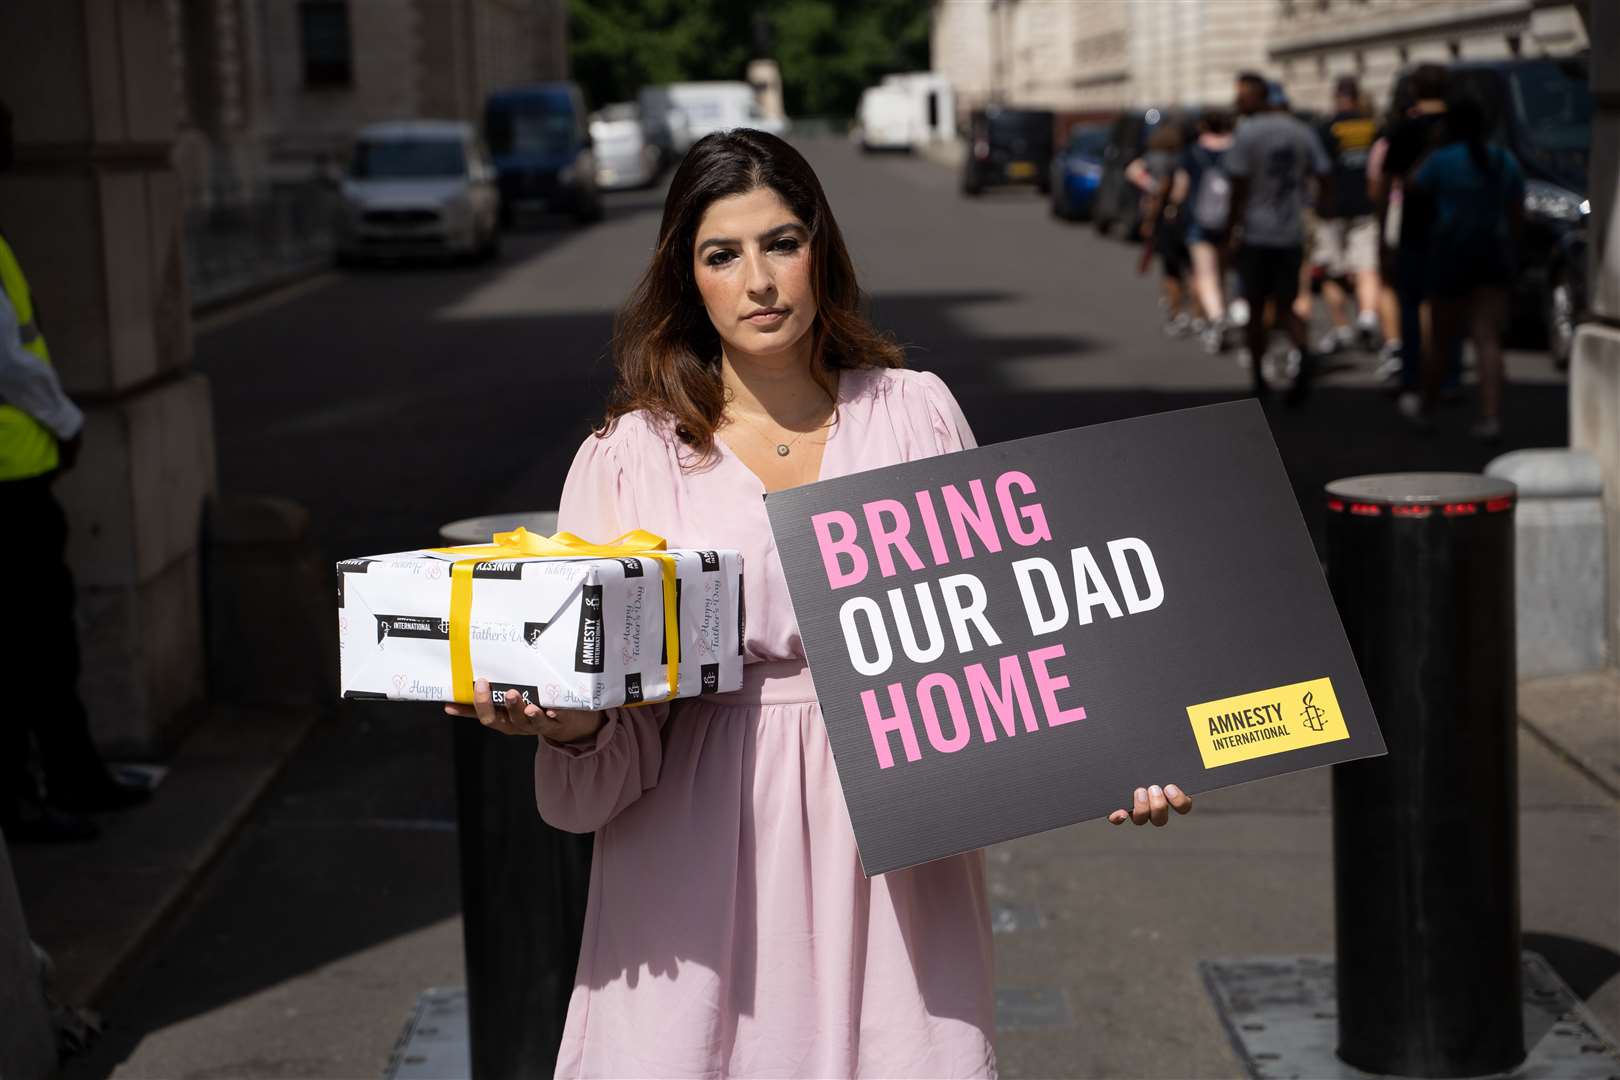 Roxanne Tahbaz has said Father’s Day is ‘the hardest day of all’ (Richard Presley/Amnesty UK/PA)